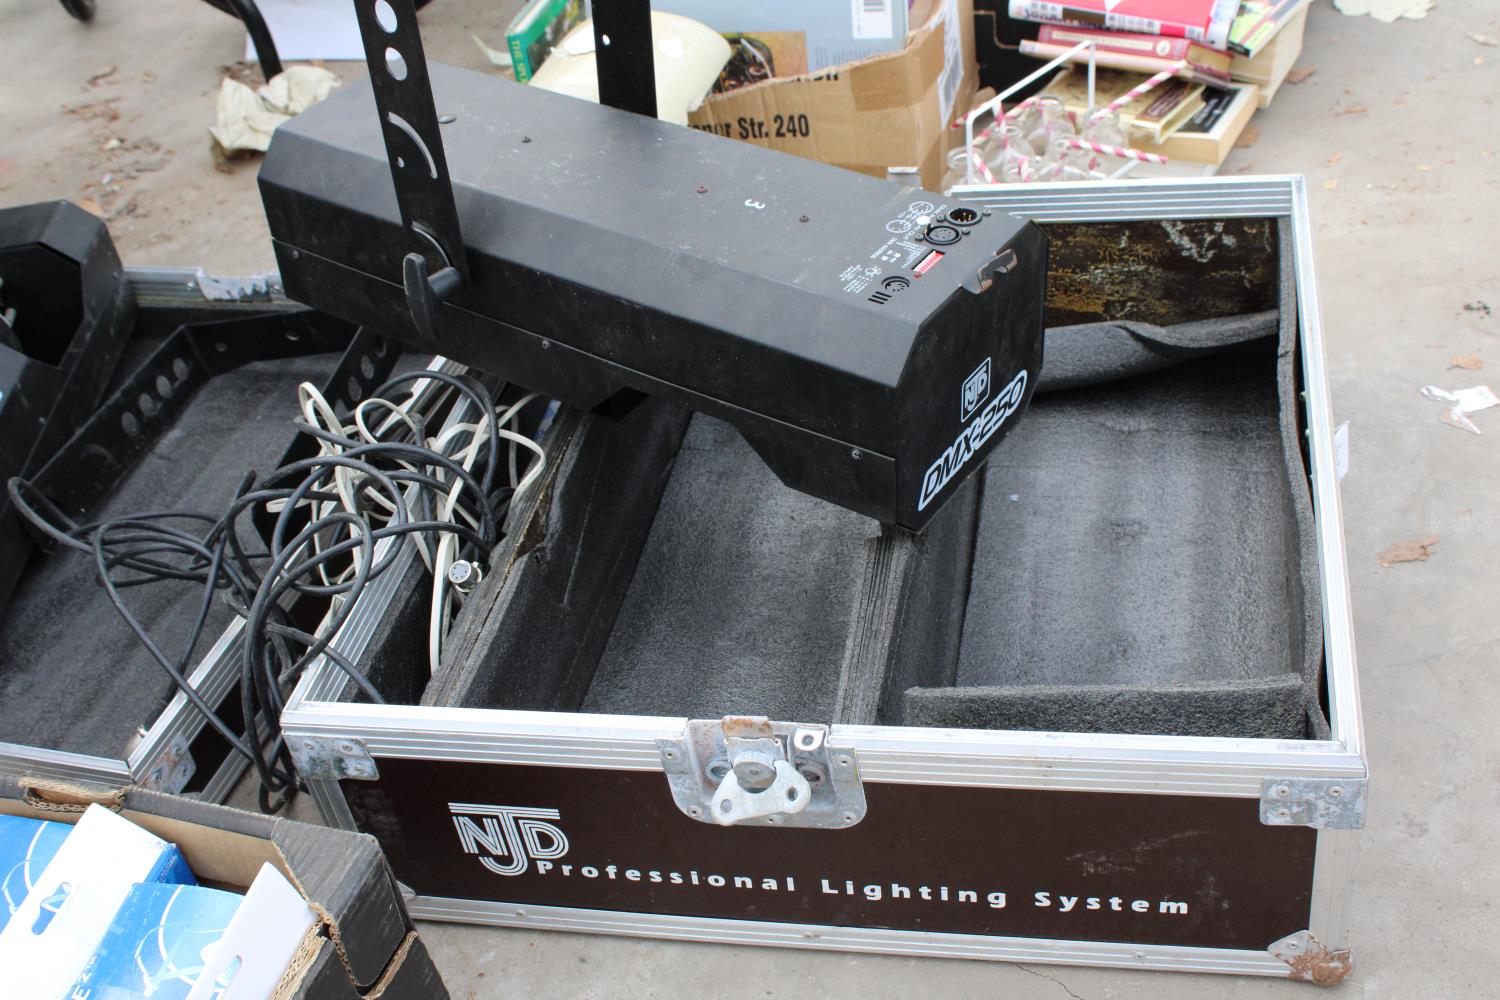 A FLIGHT CASE CONTAINING A PAIR OF NJD DMX 250 STAGE LIGHTS AND ACCESSORIES - Image 7 of 8